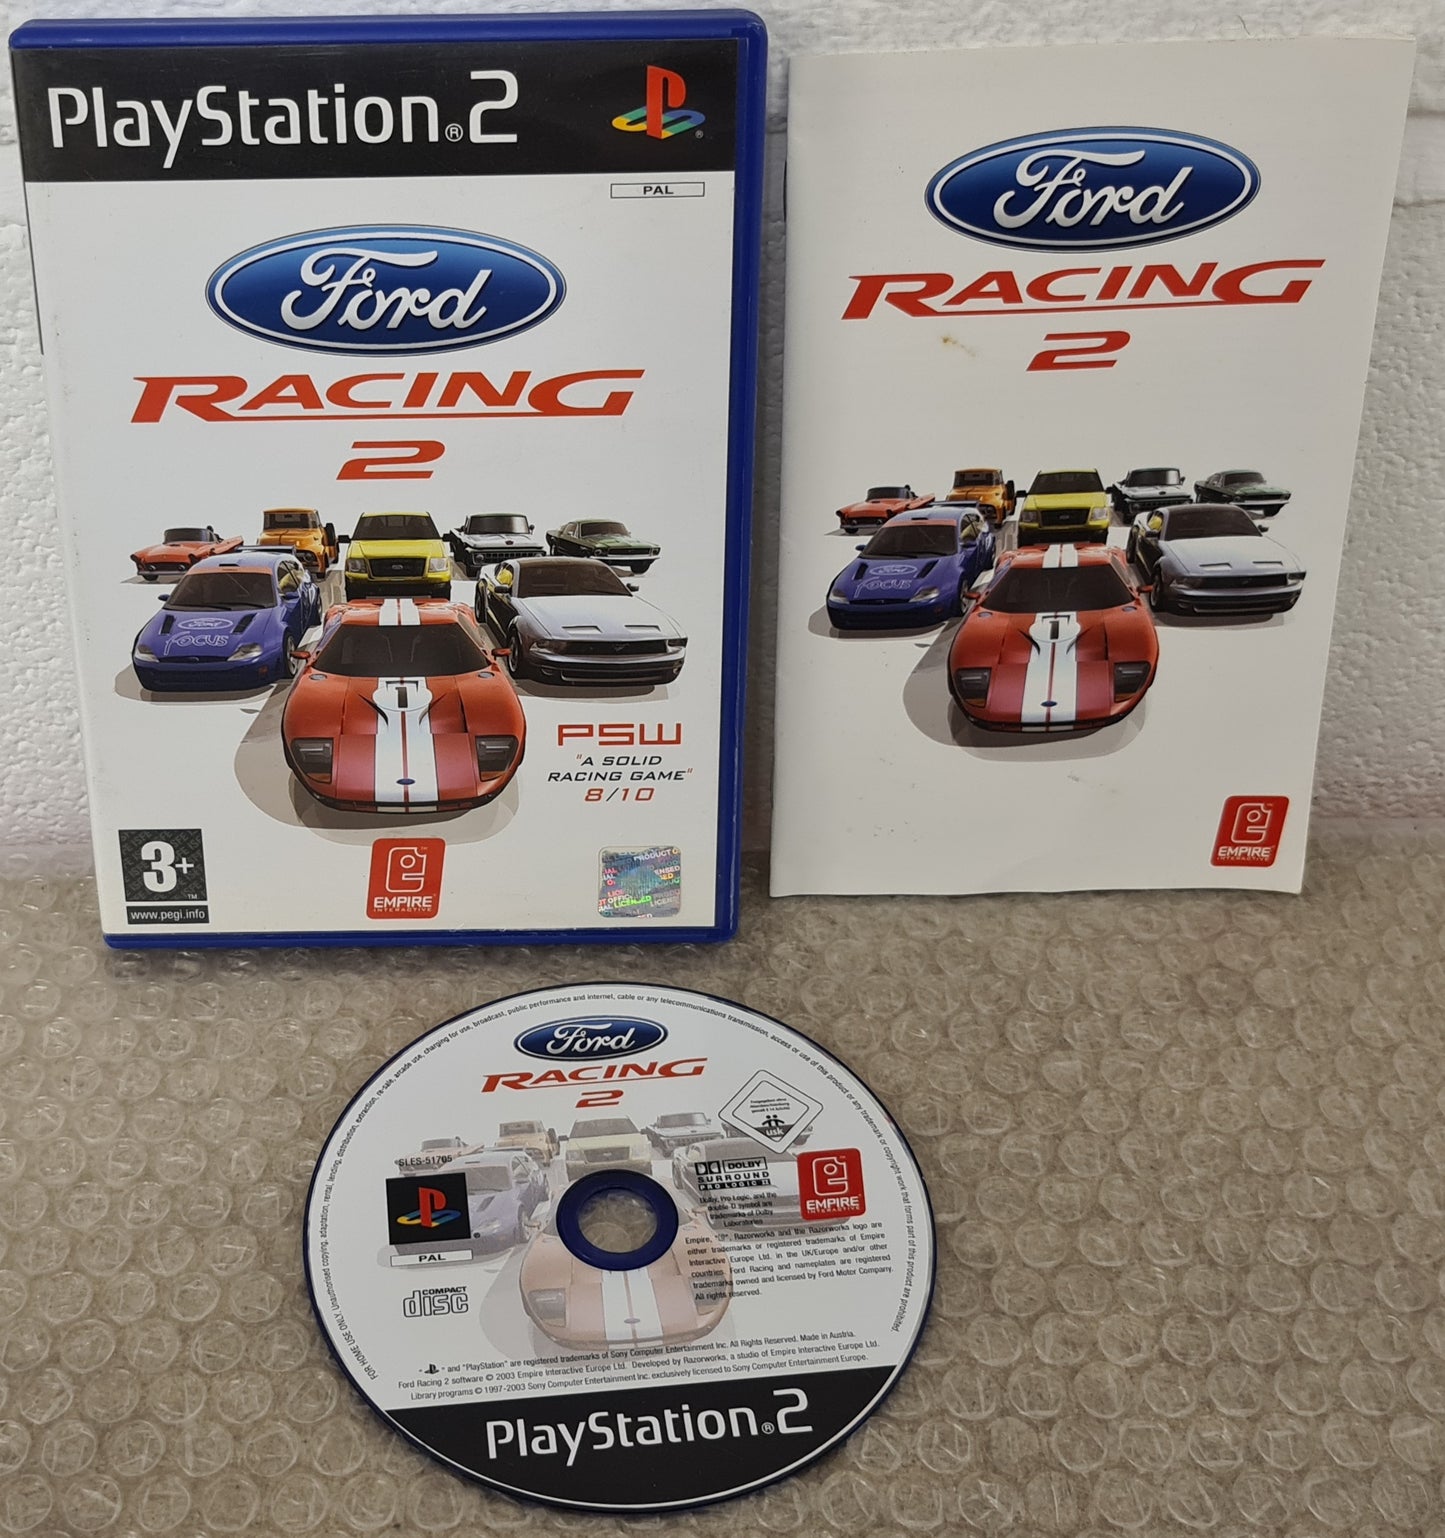 Ford Racing 2 Sony Playstation 2 (PS2) Game